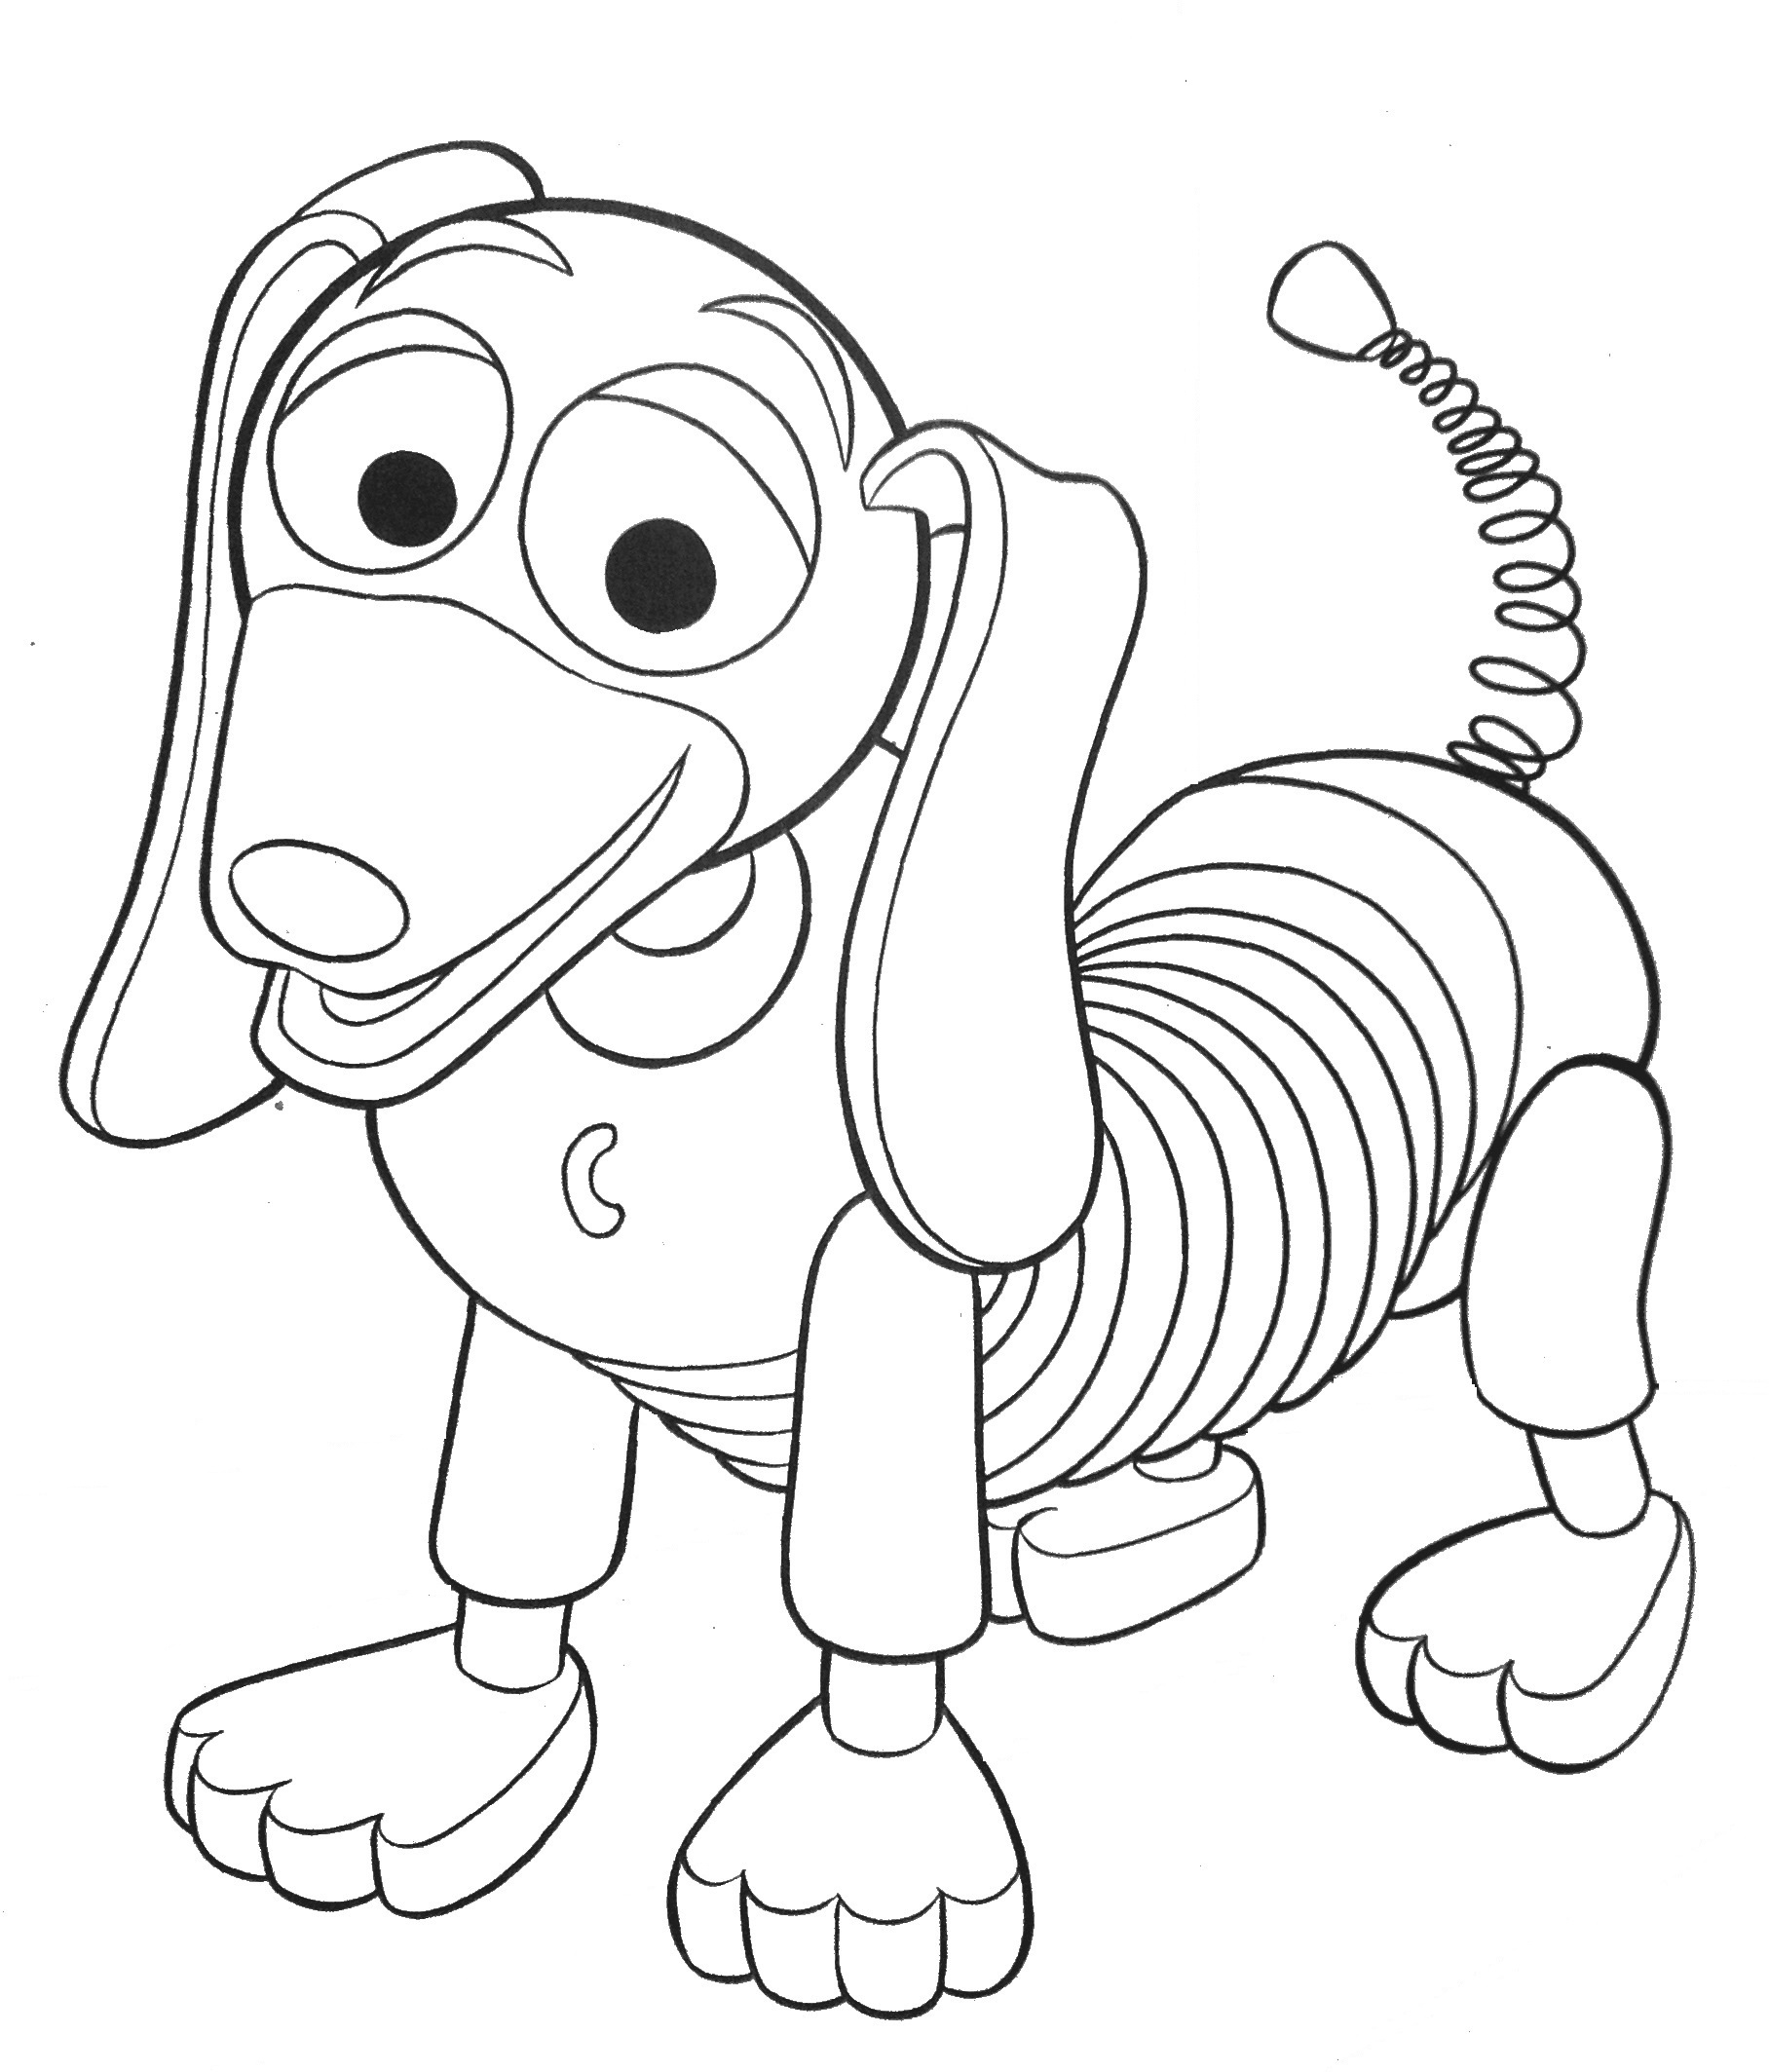 Toy Story Characters Coloring Pages at GetDrawings Free download